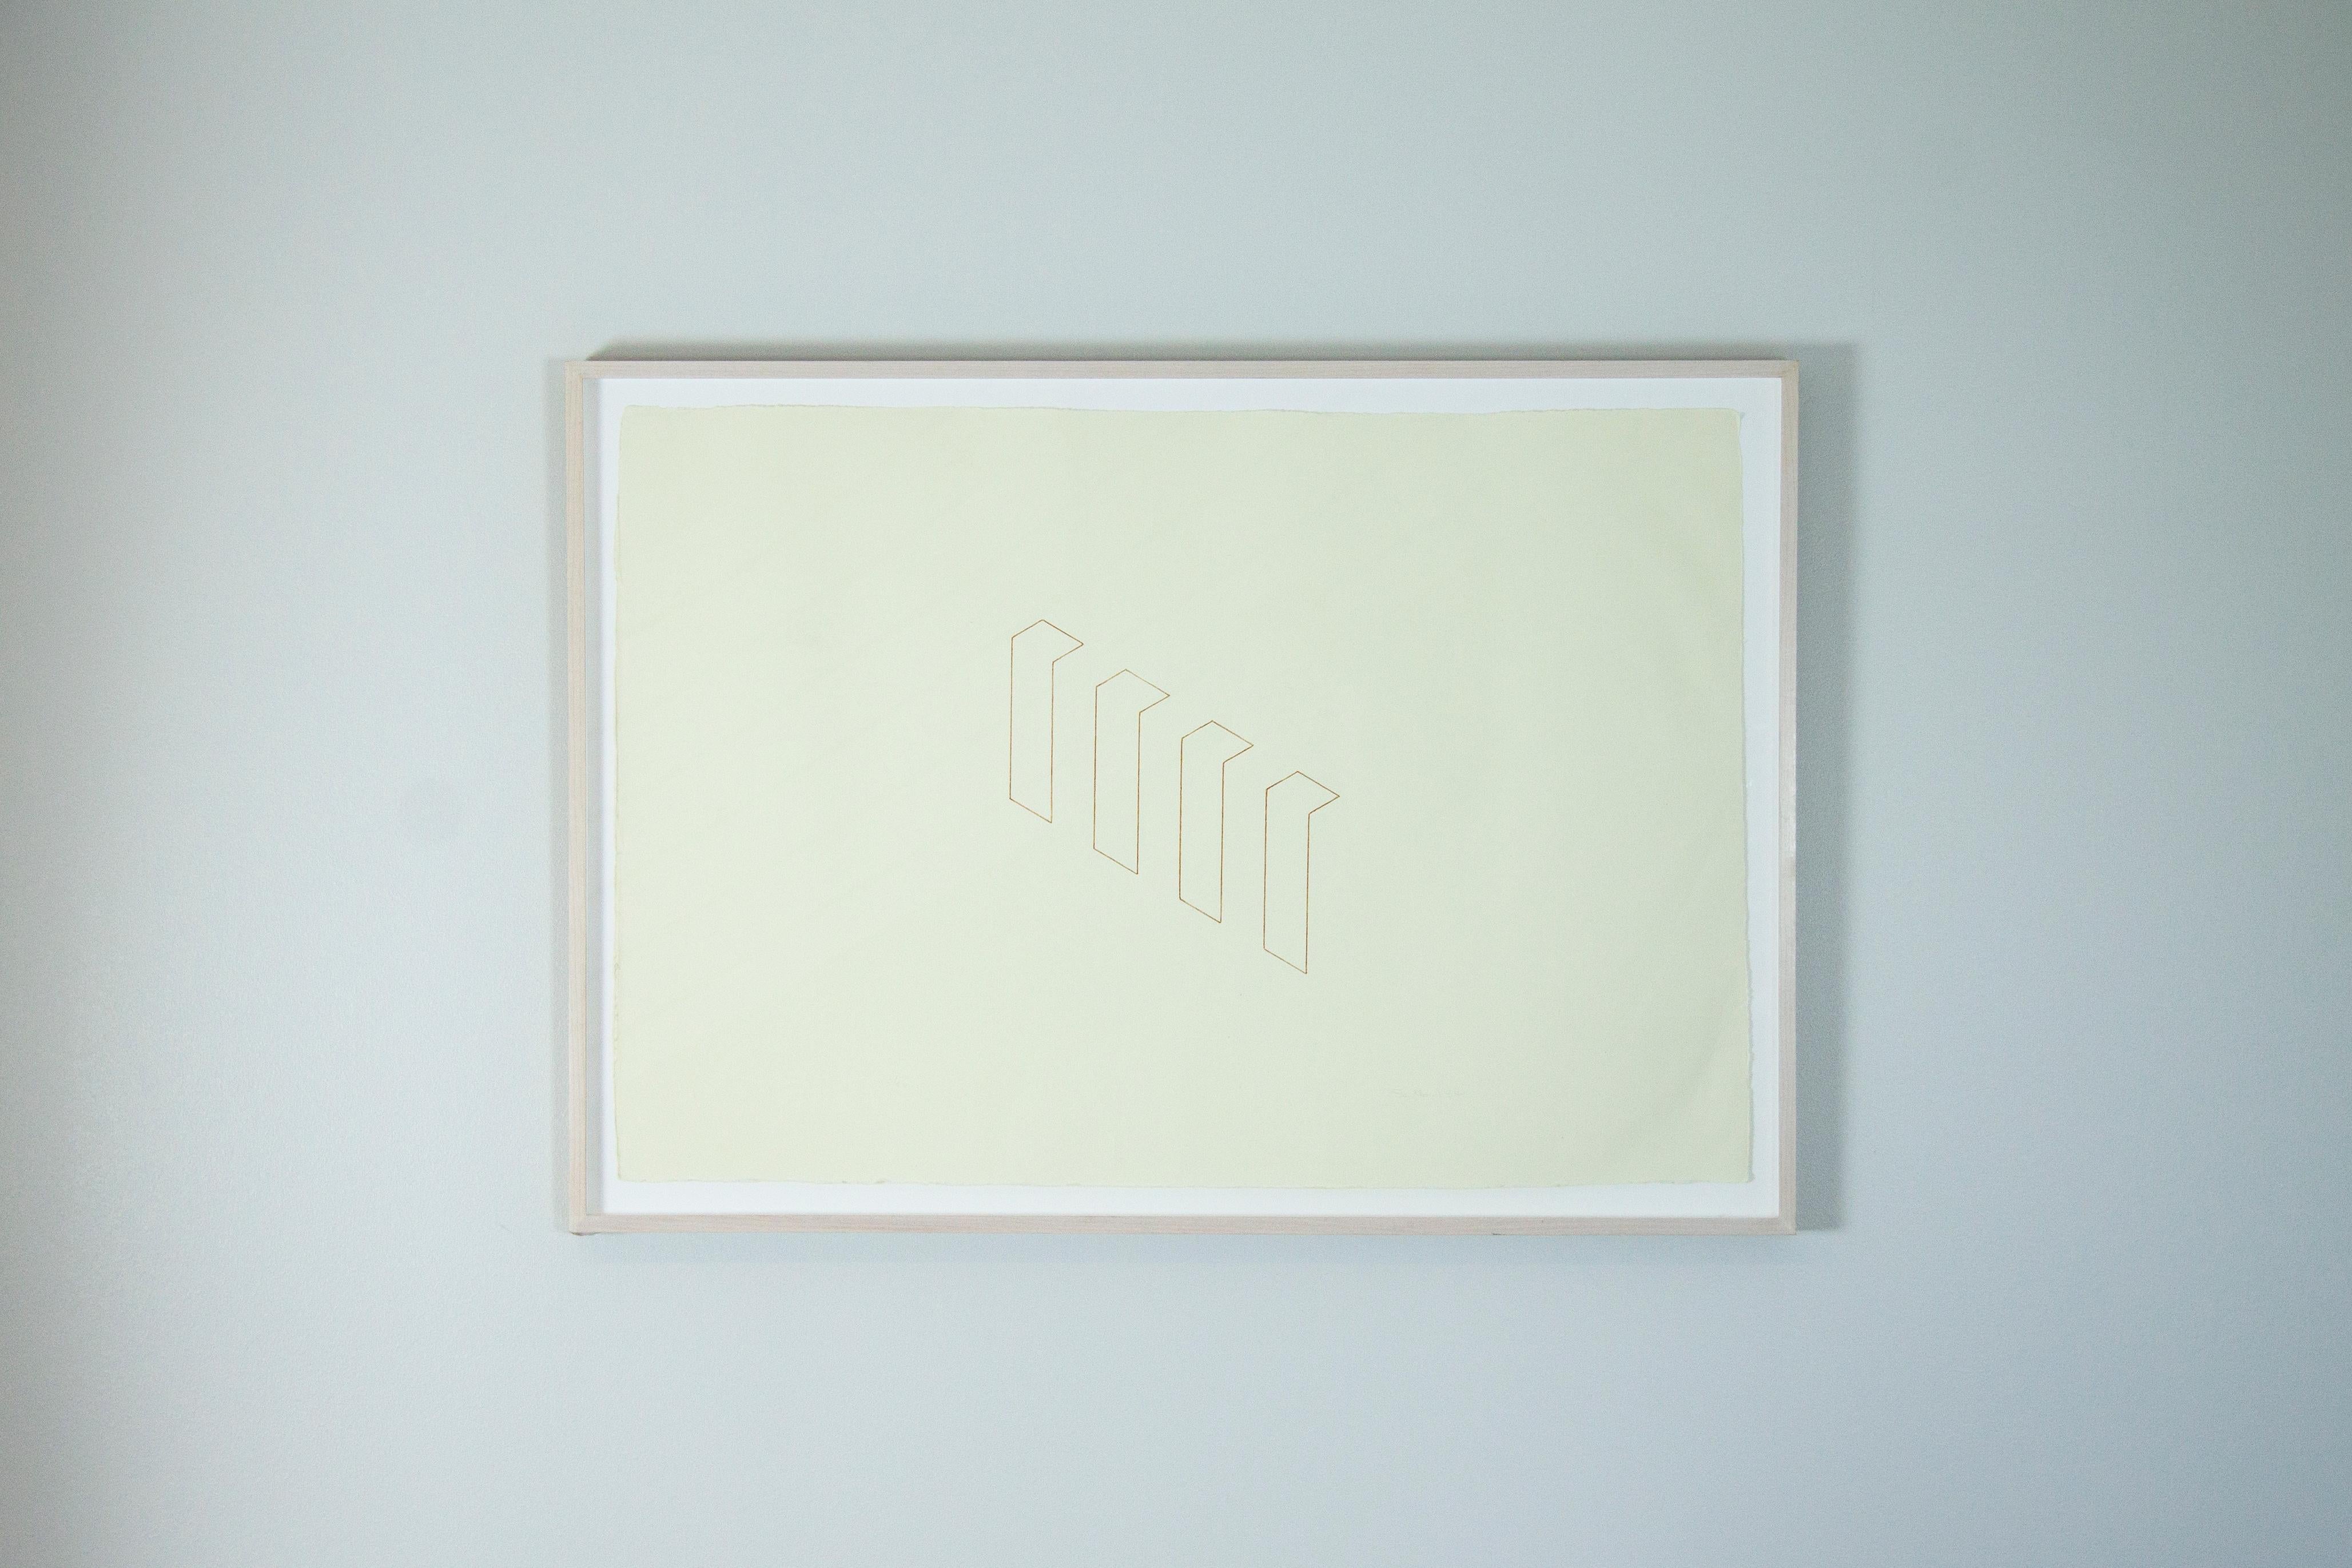 Untitled lithograph by Fred Sandback printed in brown, 1984, on Japan paper, signed, dated and numbered 15/20 in pencil, published by Edition Fred Jahn, Munich, with full margins, framed.

Artist: Fred Sandback

Year: 1984

Origin: USA

Style: Mid